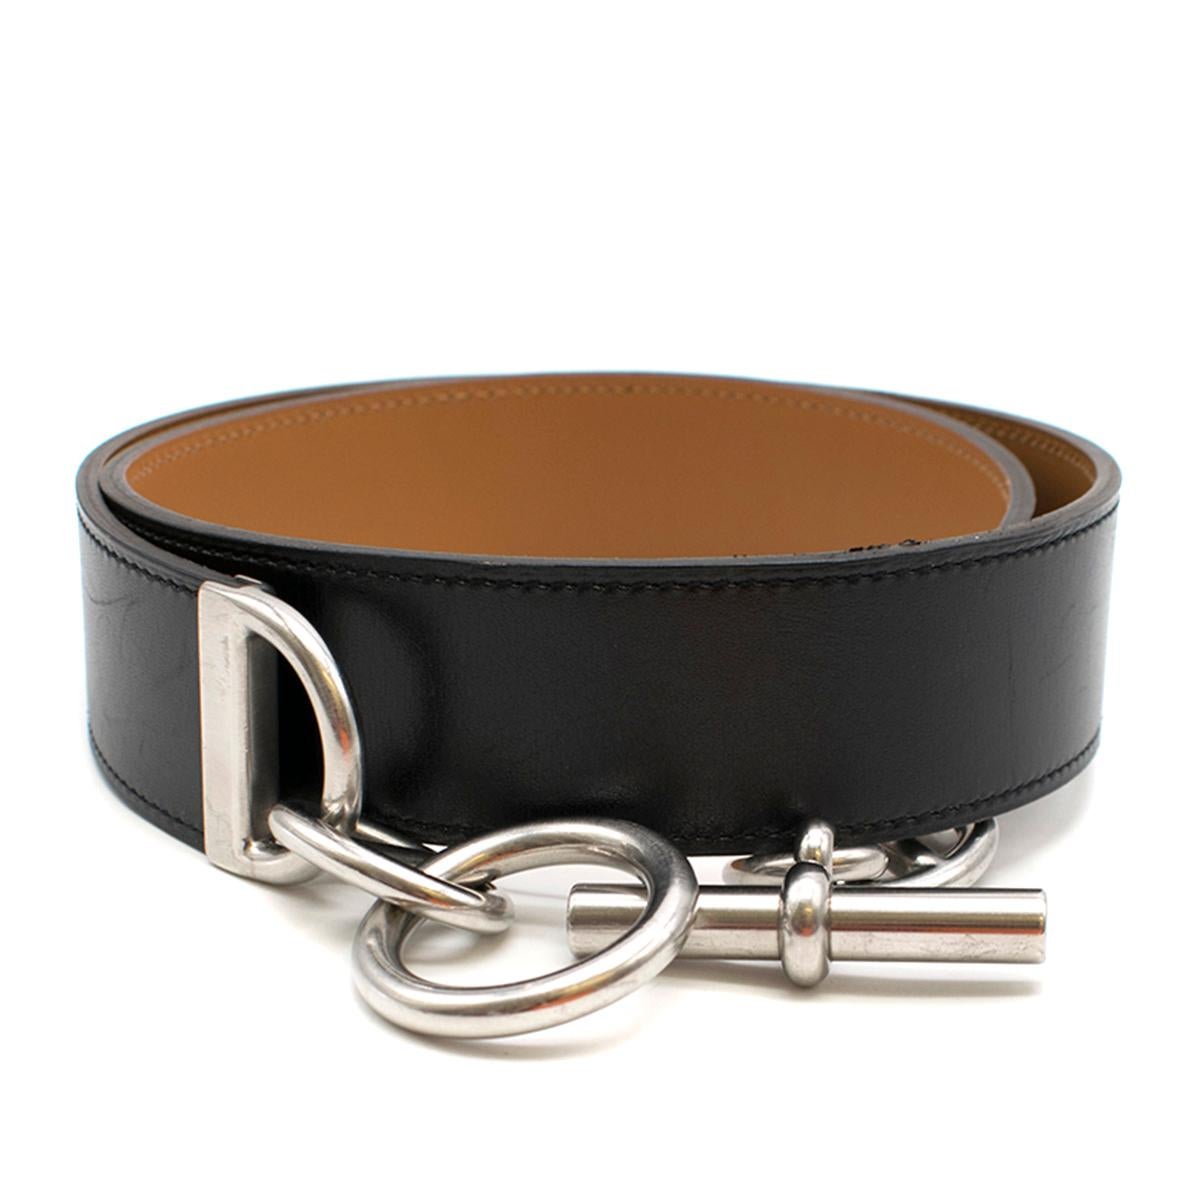 Hermès Black Chaine D'ancre Belt

- Serial number: [M]
- Year (circa): 2009 
- Black Leather Belt 
- T-bar chain fastening closure 
- Silver toned hardware 
- Brown leather lining 
- Black lacquered sides

This item comes with a box. 

Please note,